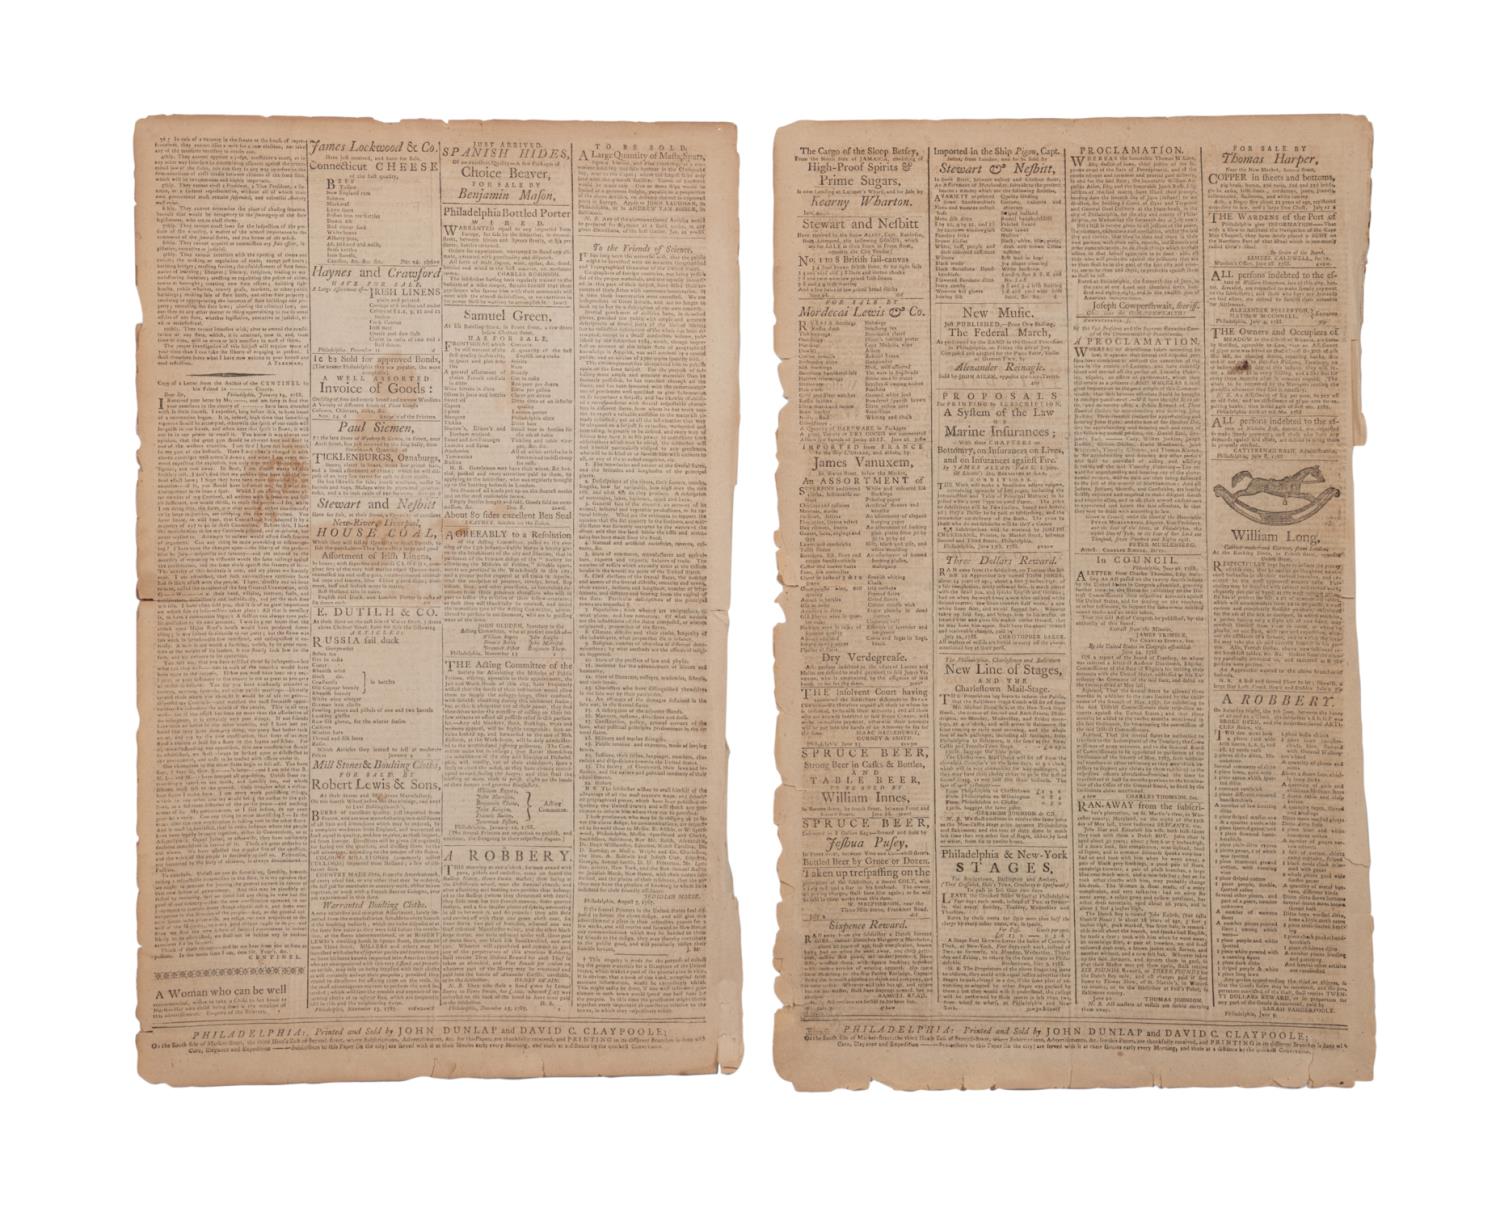 PENNSYLVANIA PACKET AND DAILY ADVERTISER, 1788 - Image 2 of 5